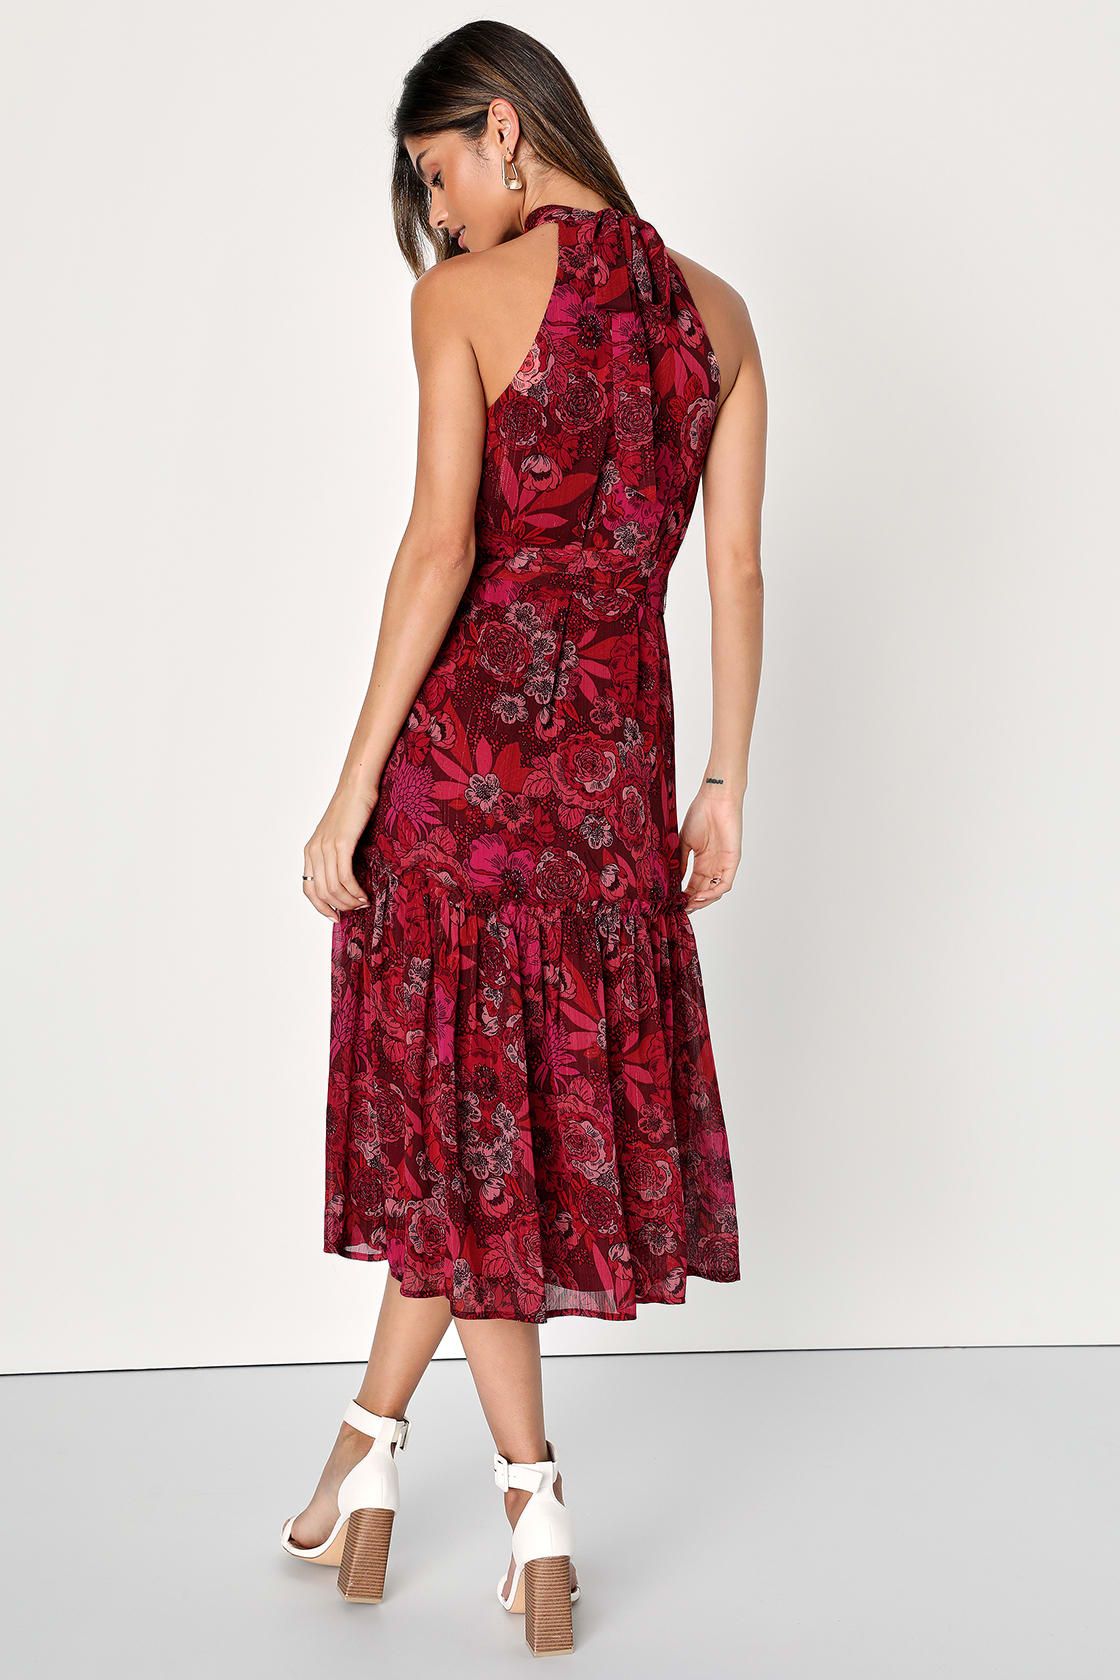 Standout Aesthetic Red Floral Lurex Halter Tiered Midi Dress | Lulus (US)